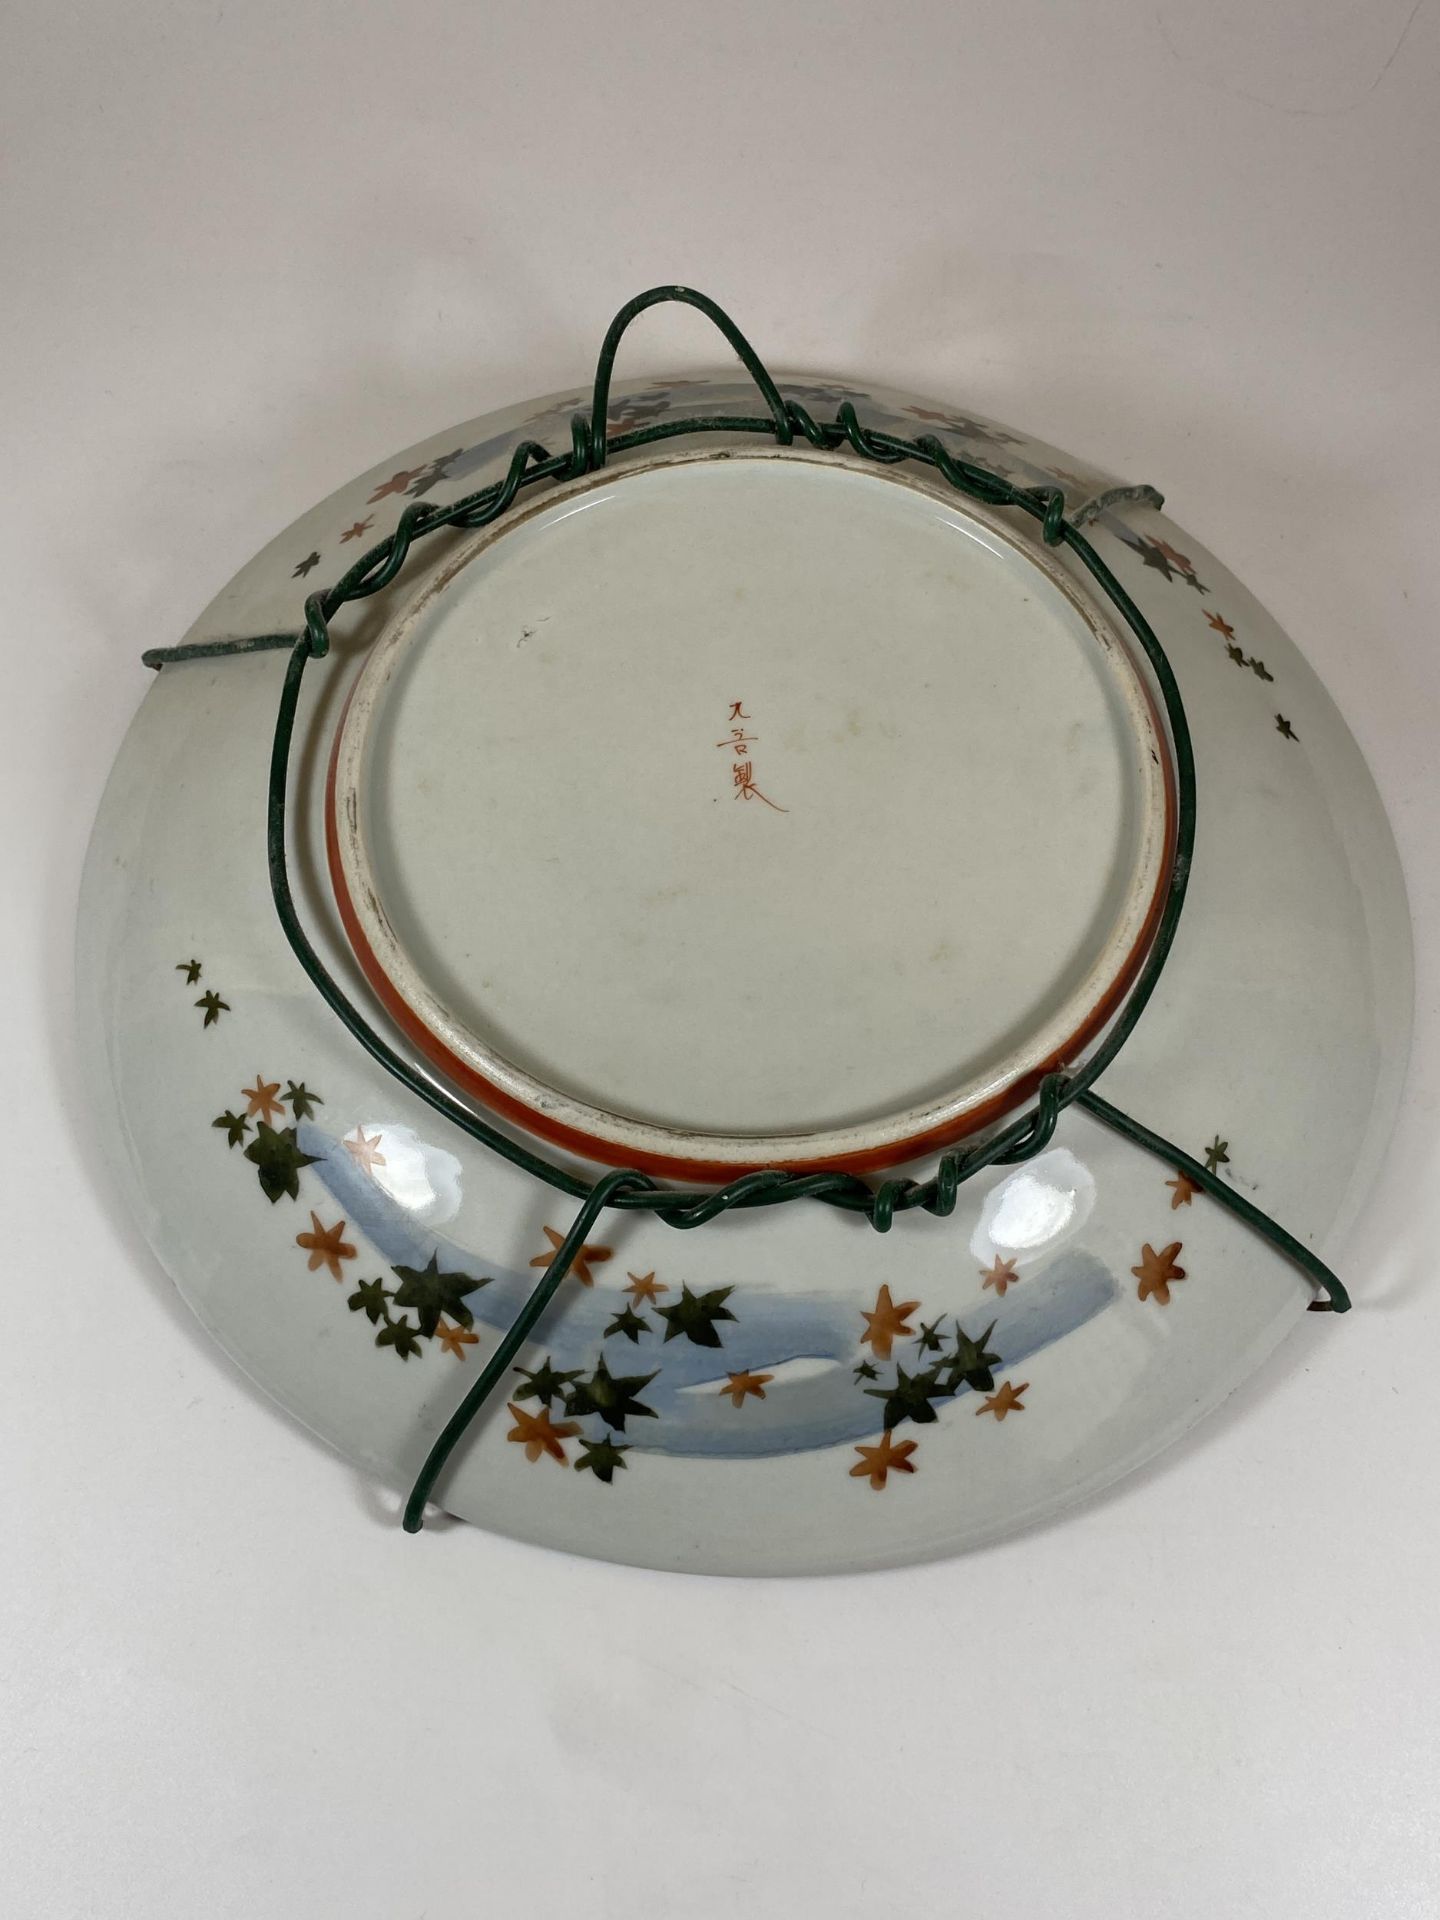 A JAPANESE MEIJI PERIOD (1868-1912) KUTANI CHARGER WITH FIGURAL DESIGN, DIAMETER 30CM - Image 3 of 5